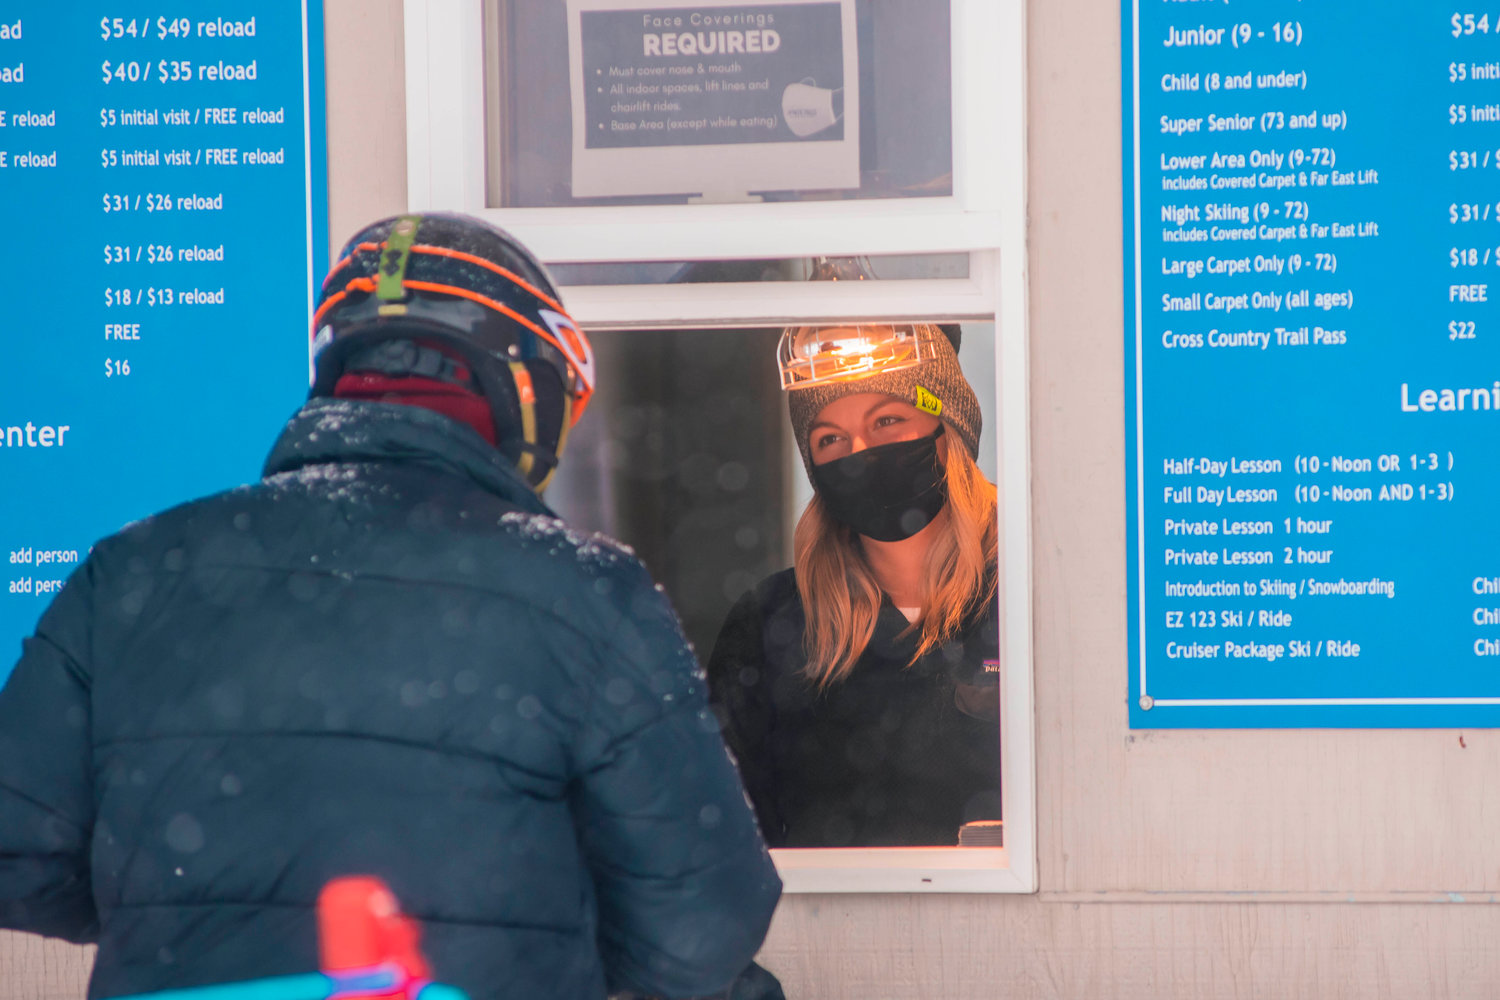 Face coverings are required at the White Pass Ski Resort.